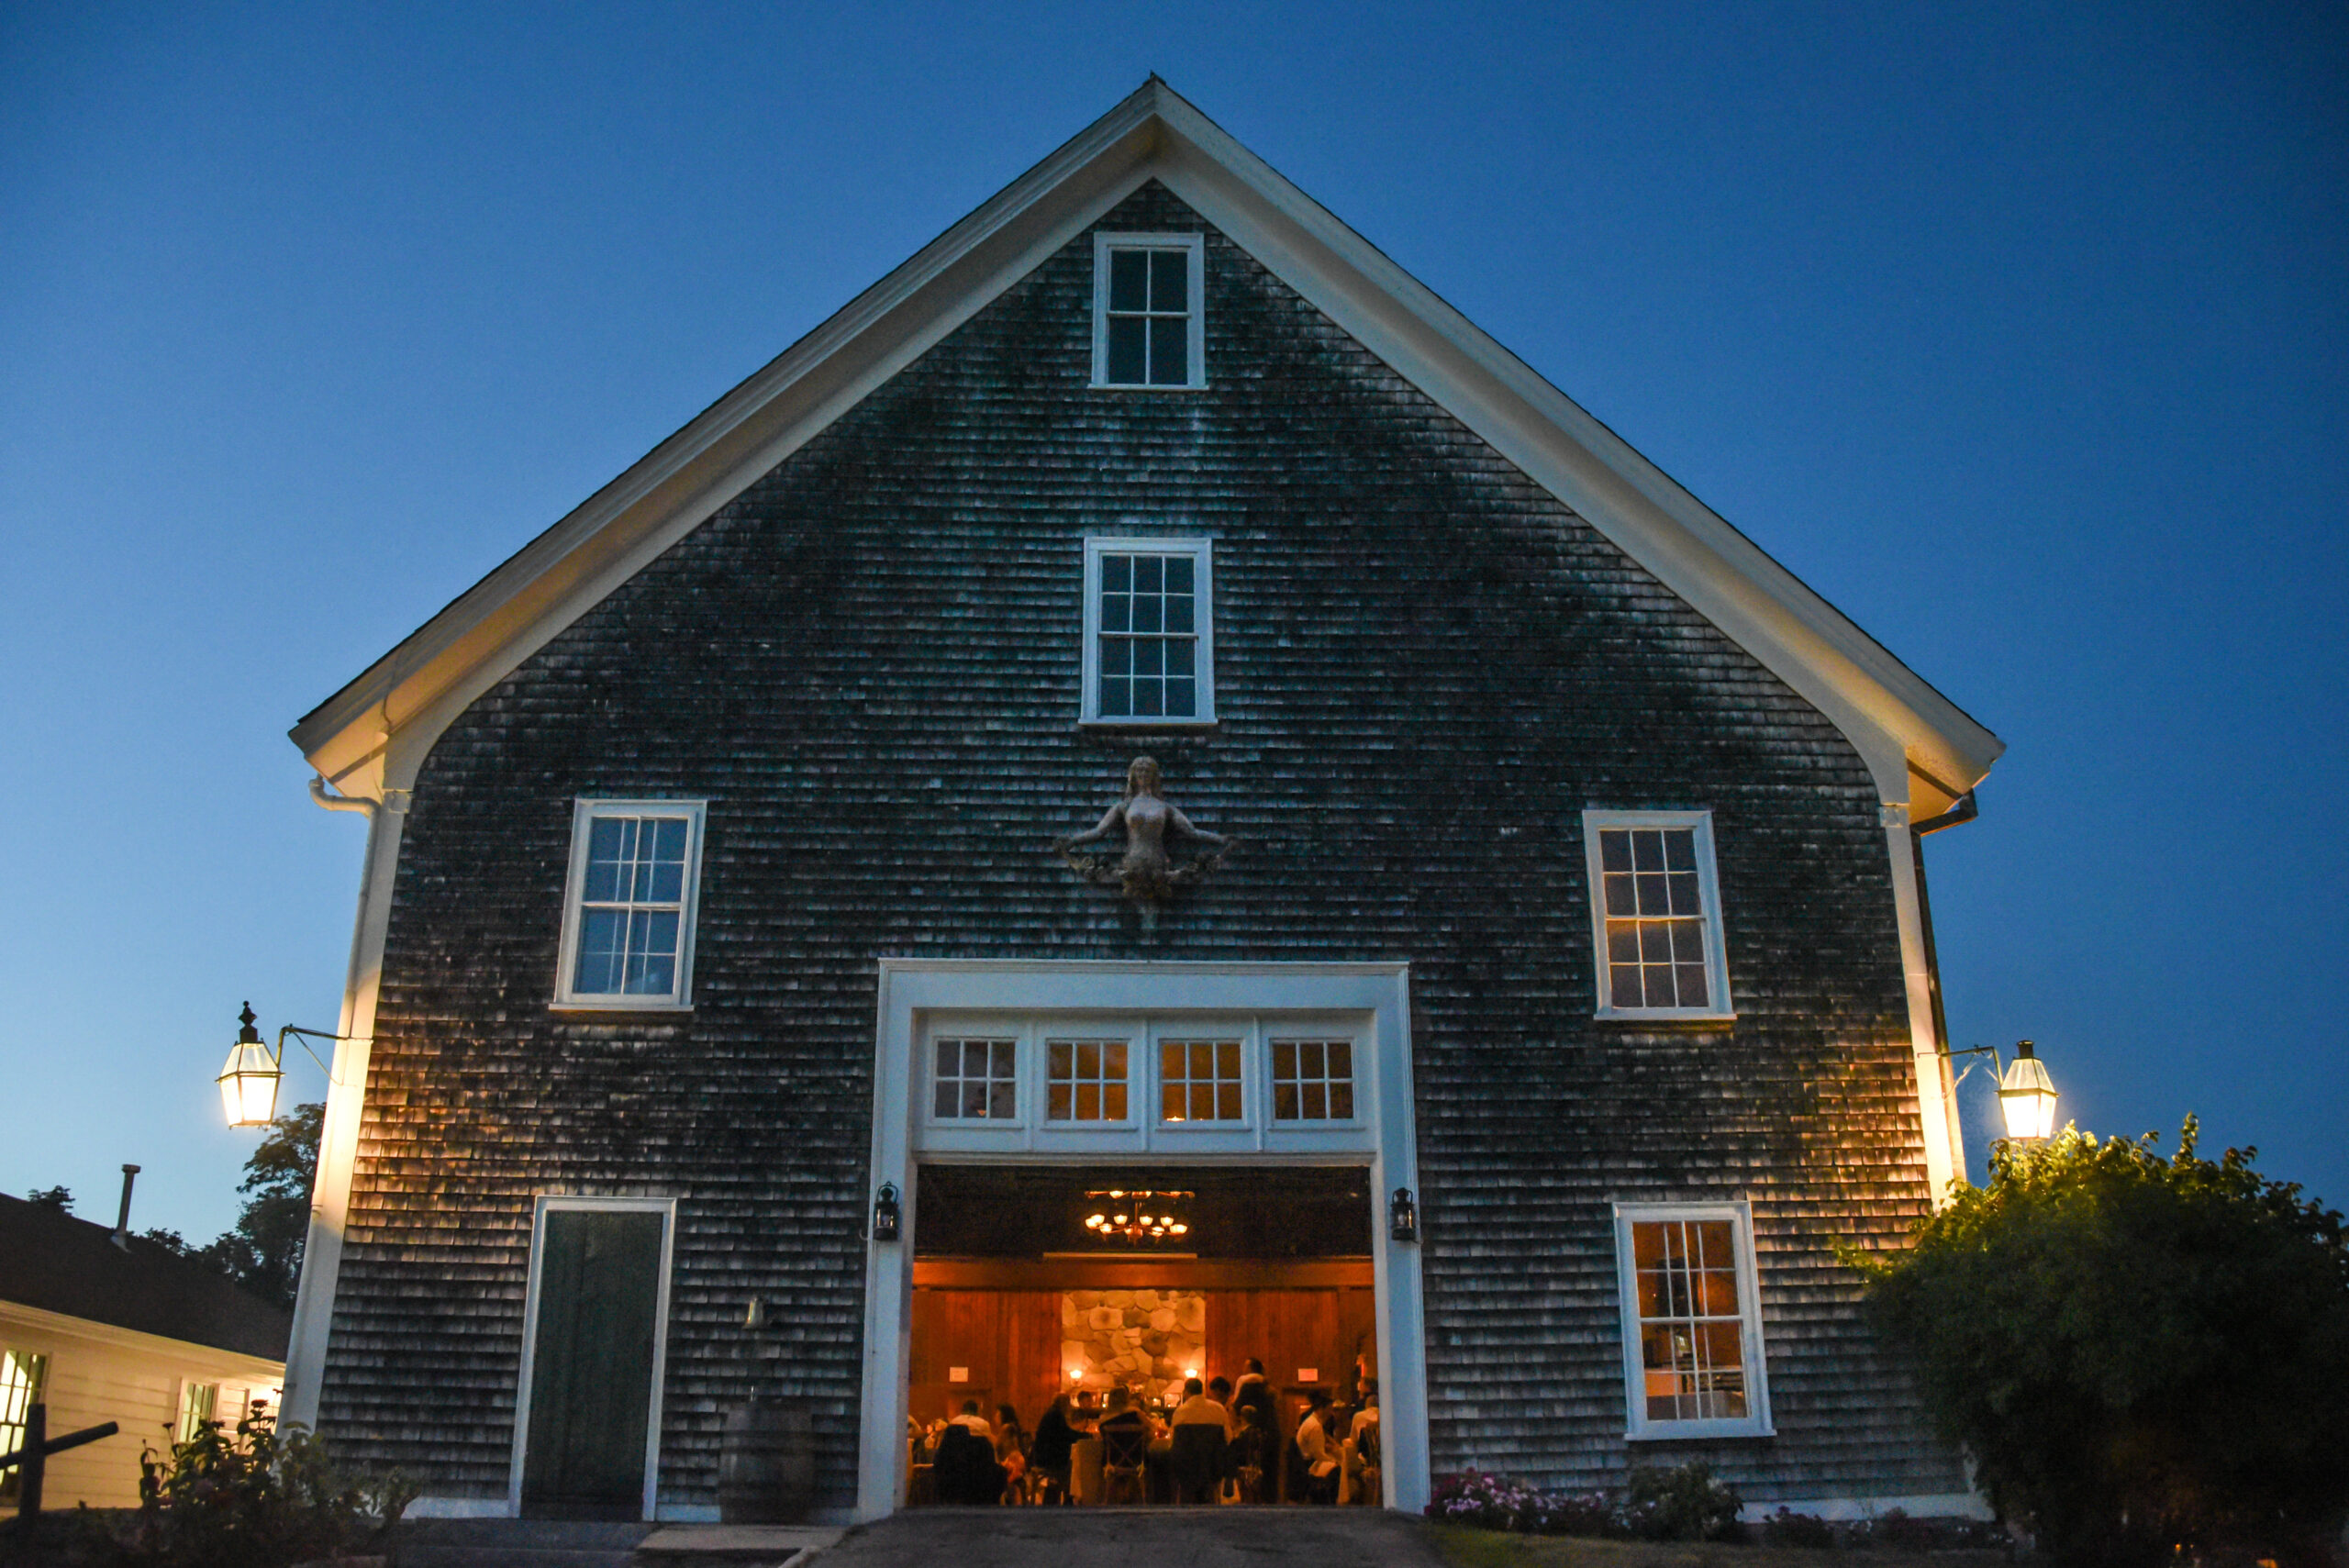 The Barn at Mount Hope Farm glows in the blue light of dusk, during a wedding reception.